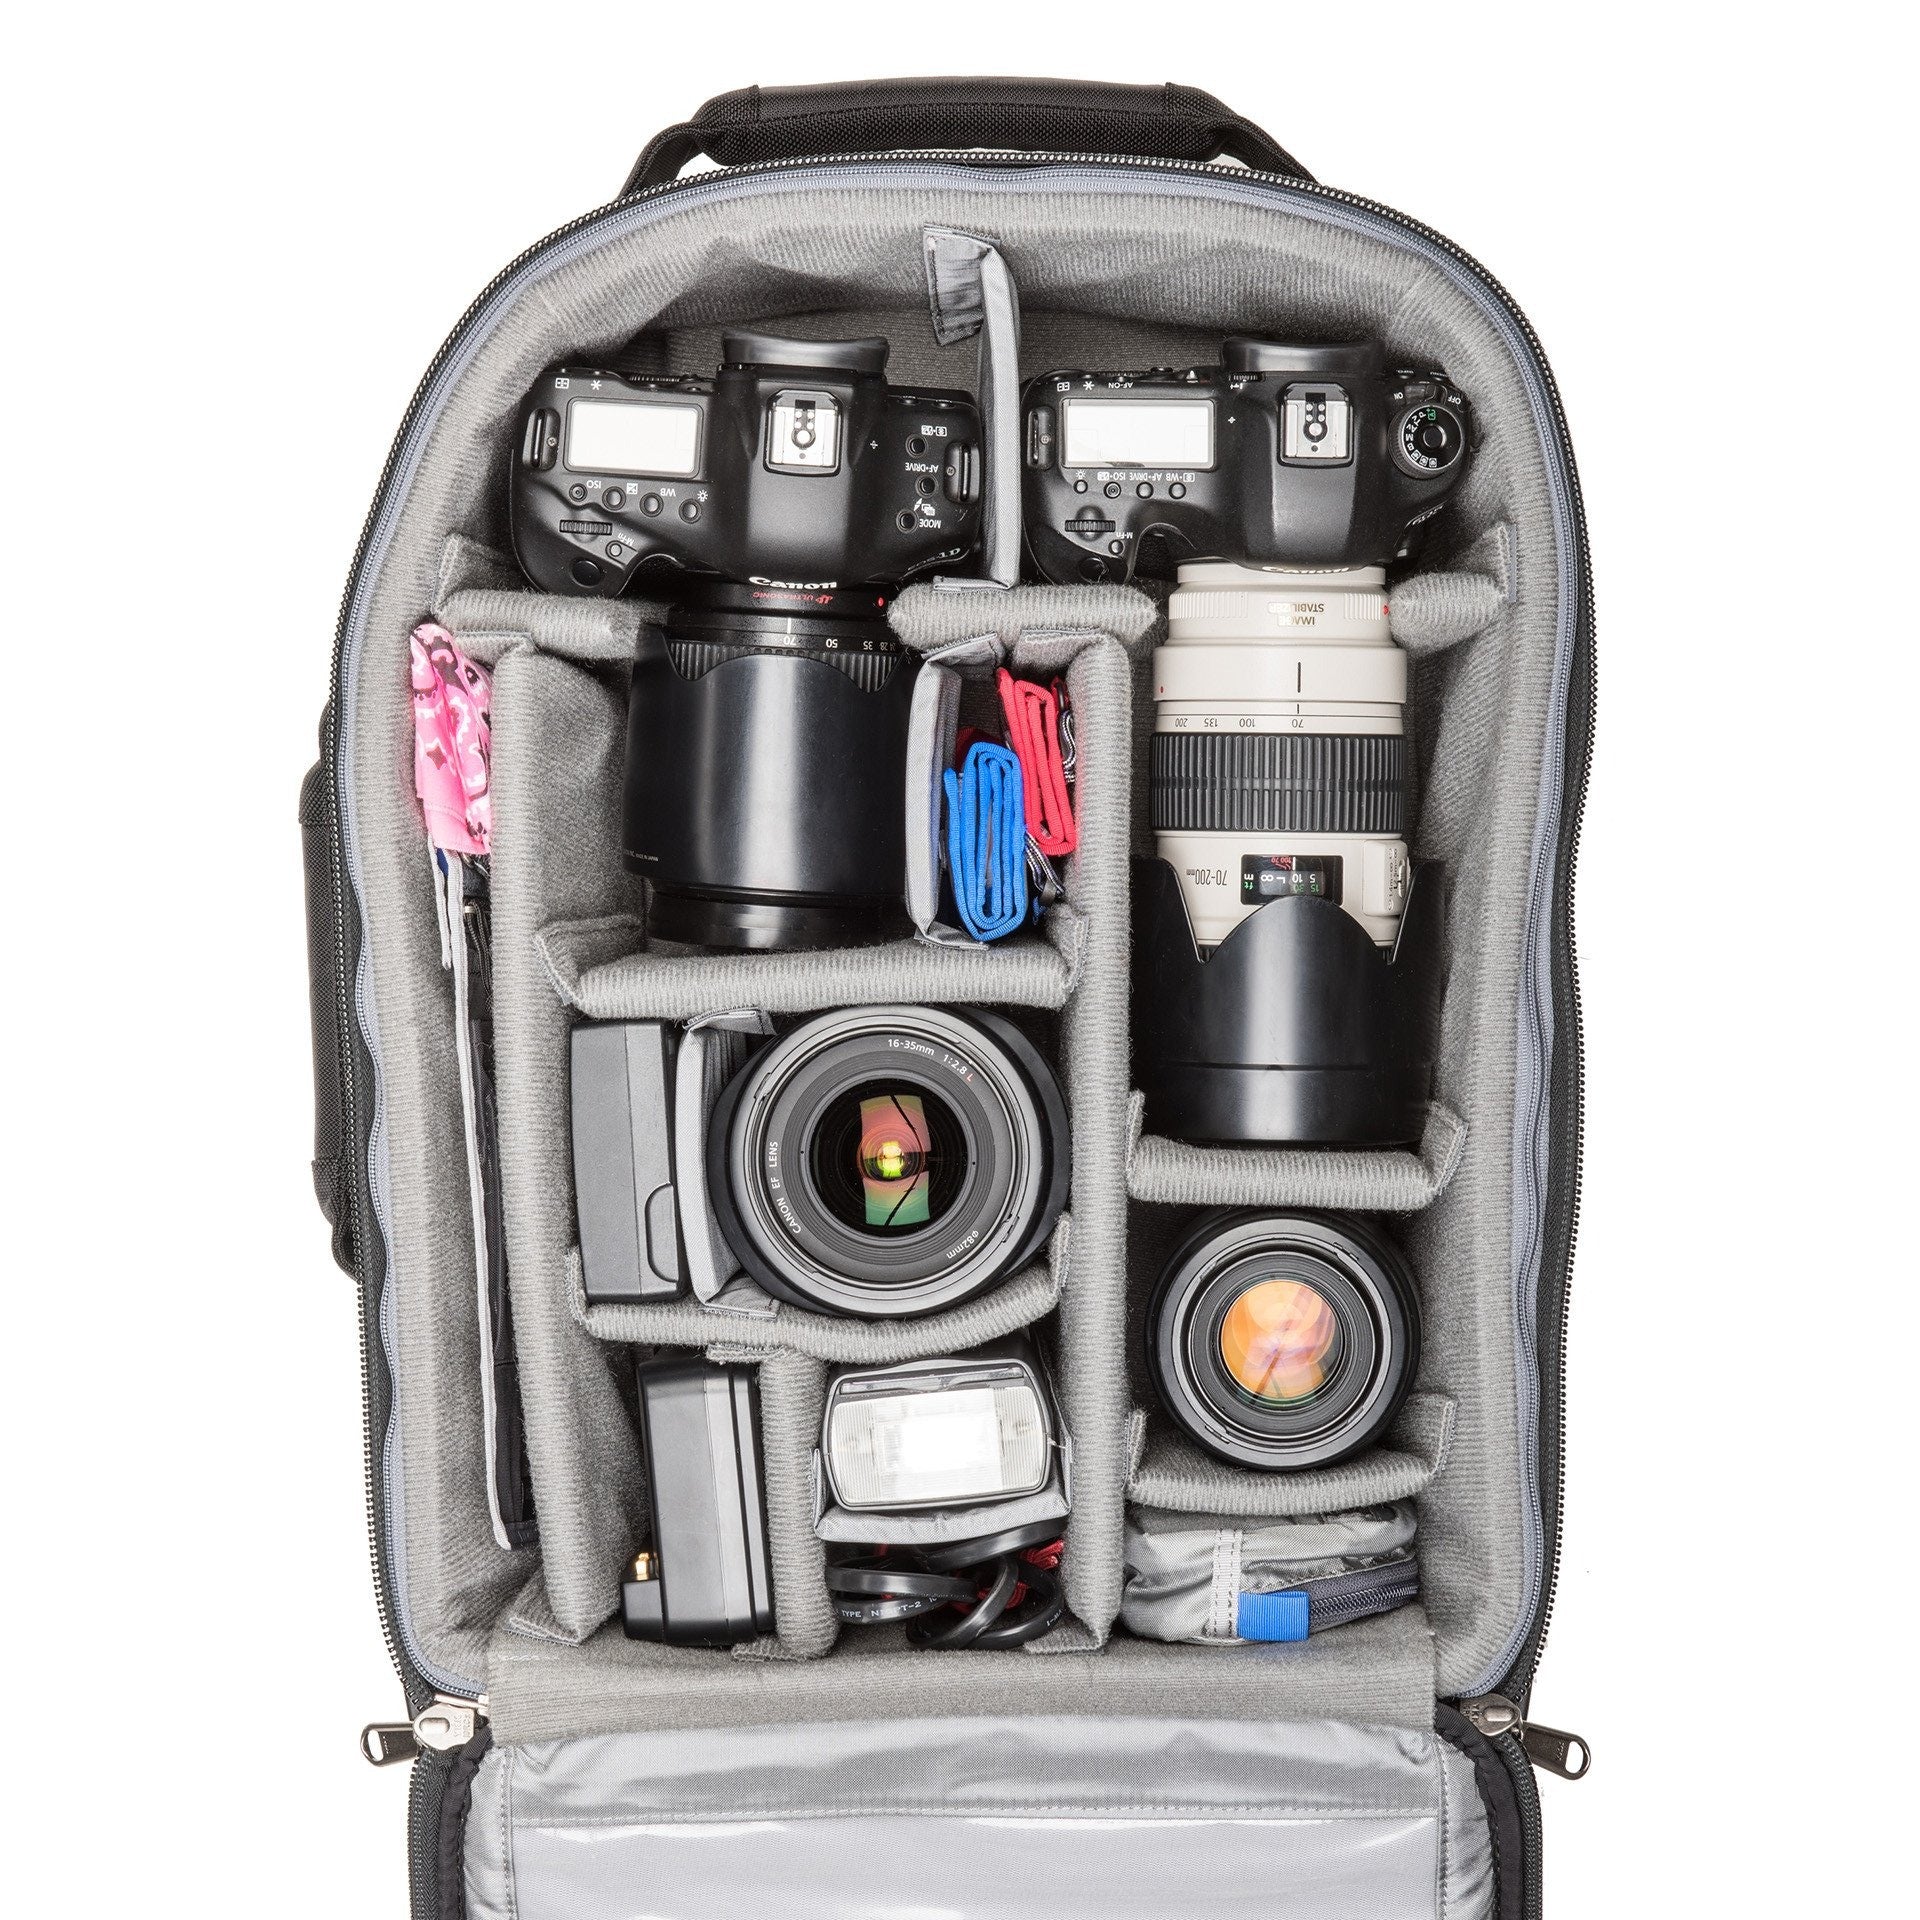 2 gripped DSLRs with lenses attached plus 2–4 additional lenses, 15” laptop and a 10” tablet